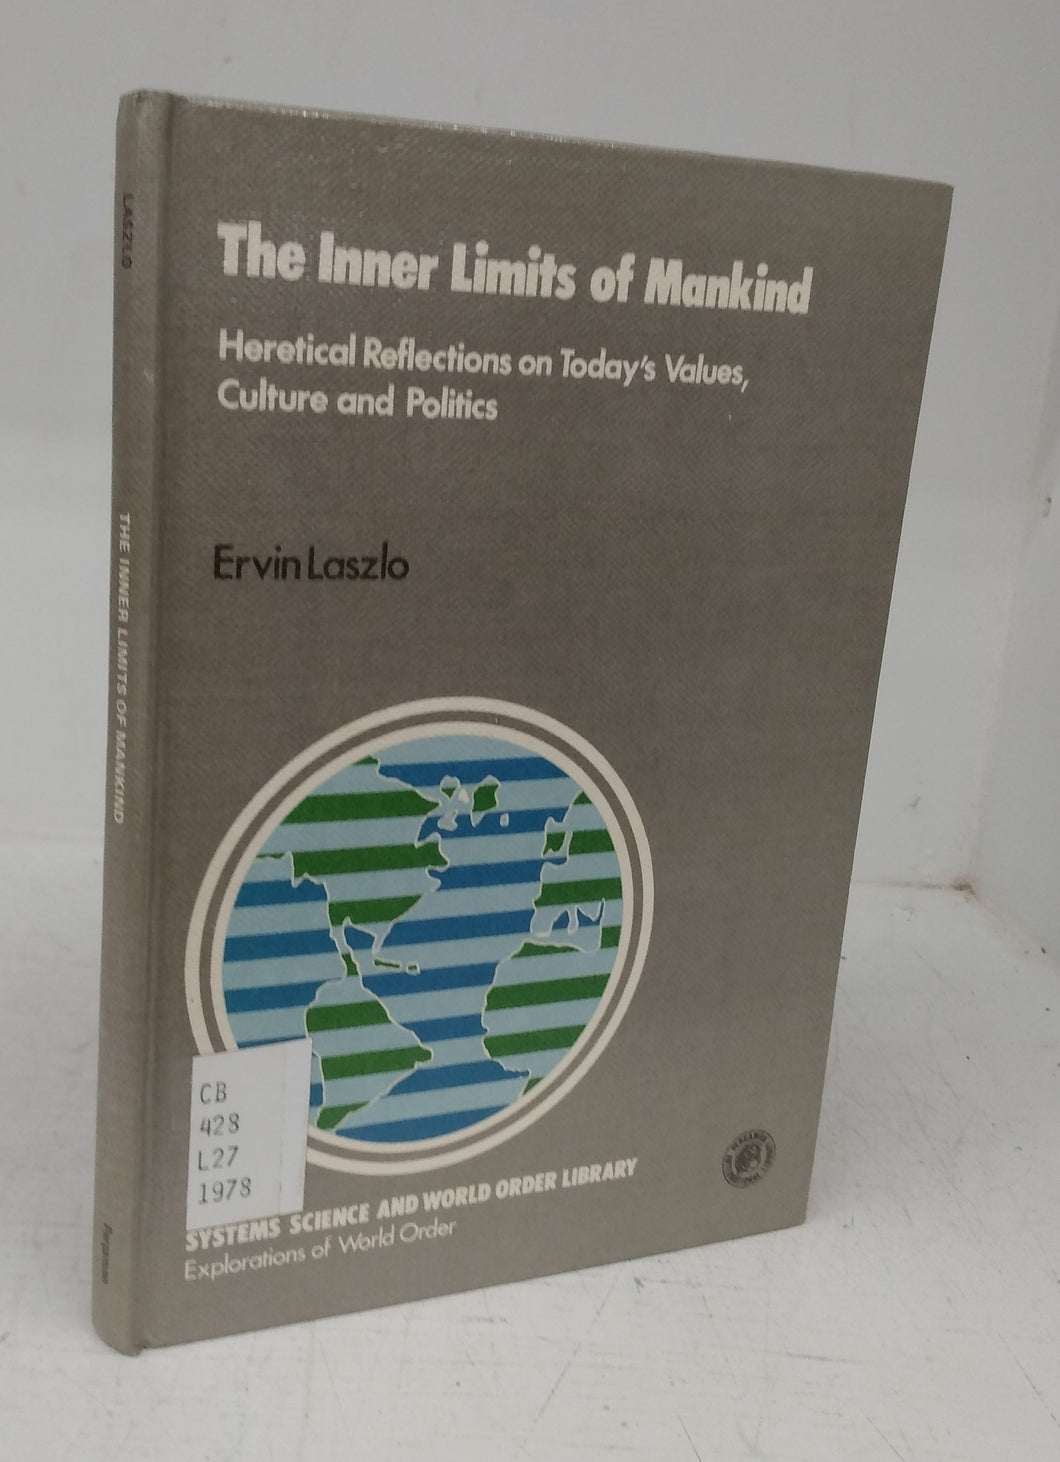 The Inner Limits of Mankind: Heretical Reflections on Today's Values, Culture and Politics